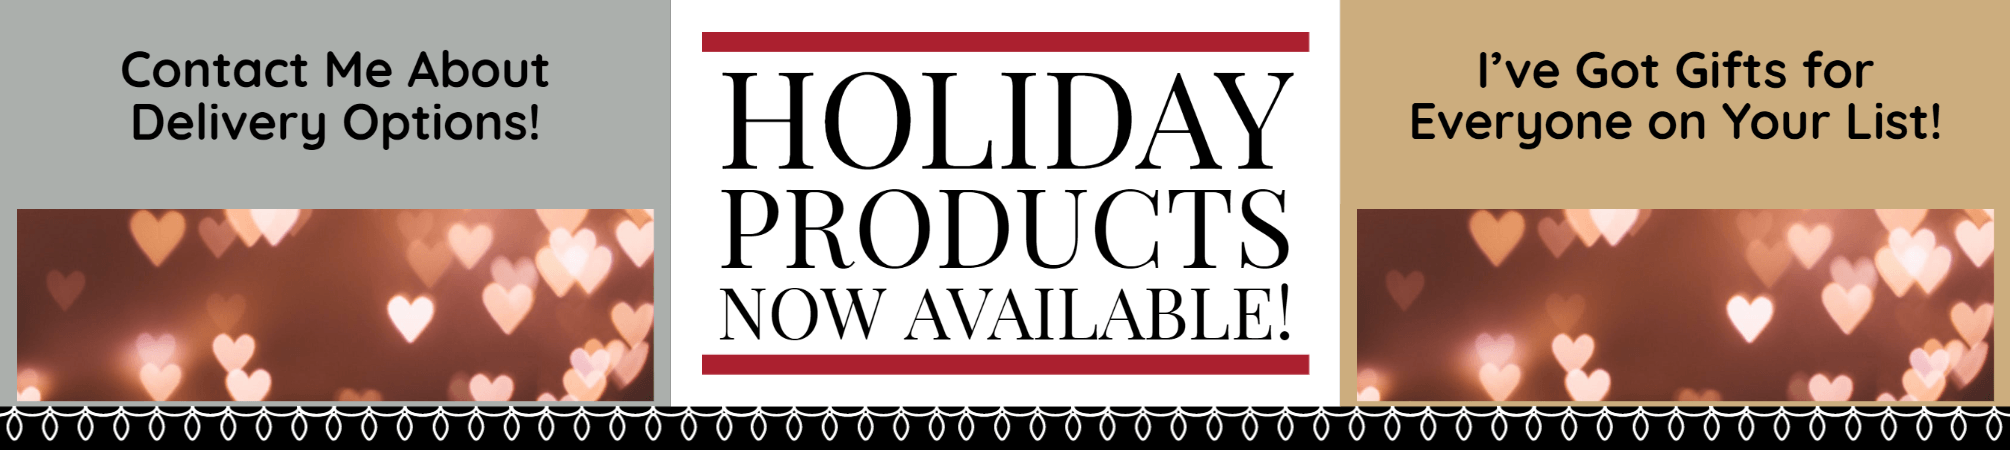 InvoiceBanner-HolidayProducts.png